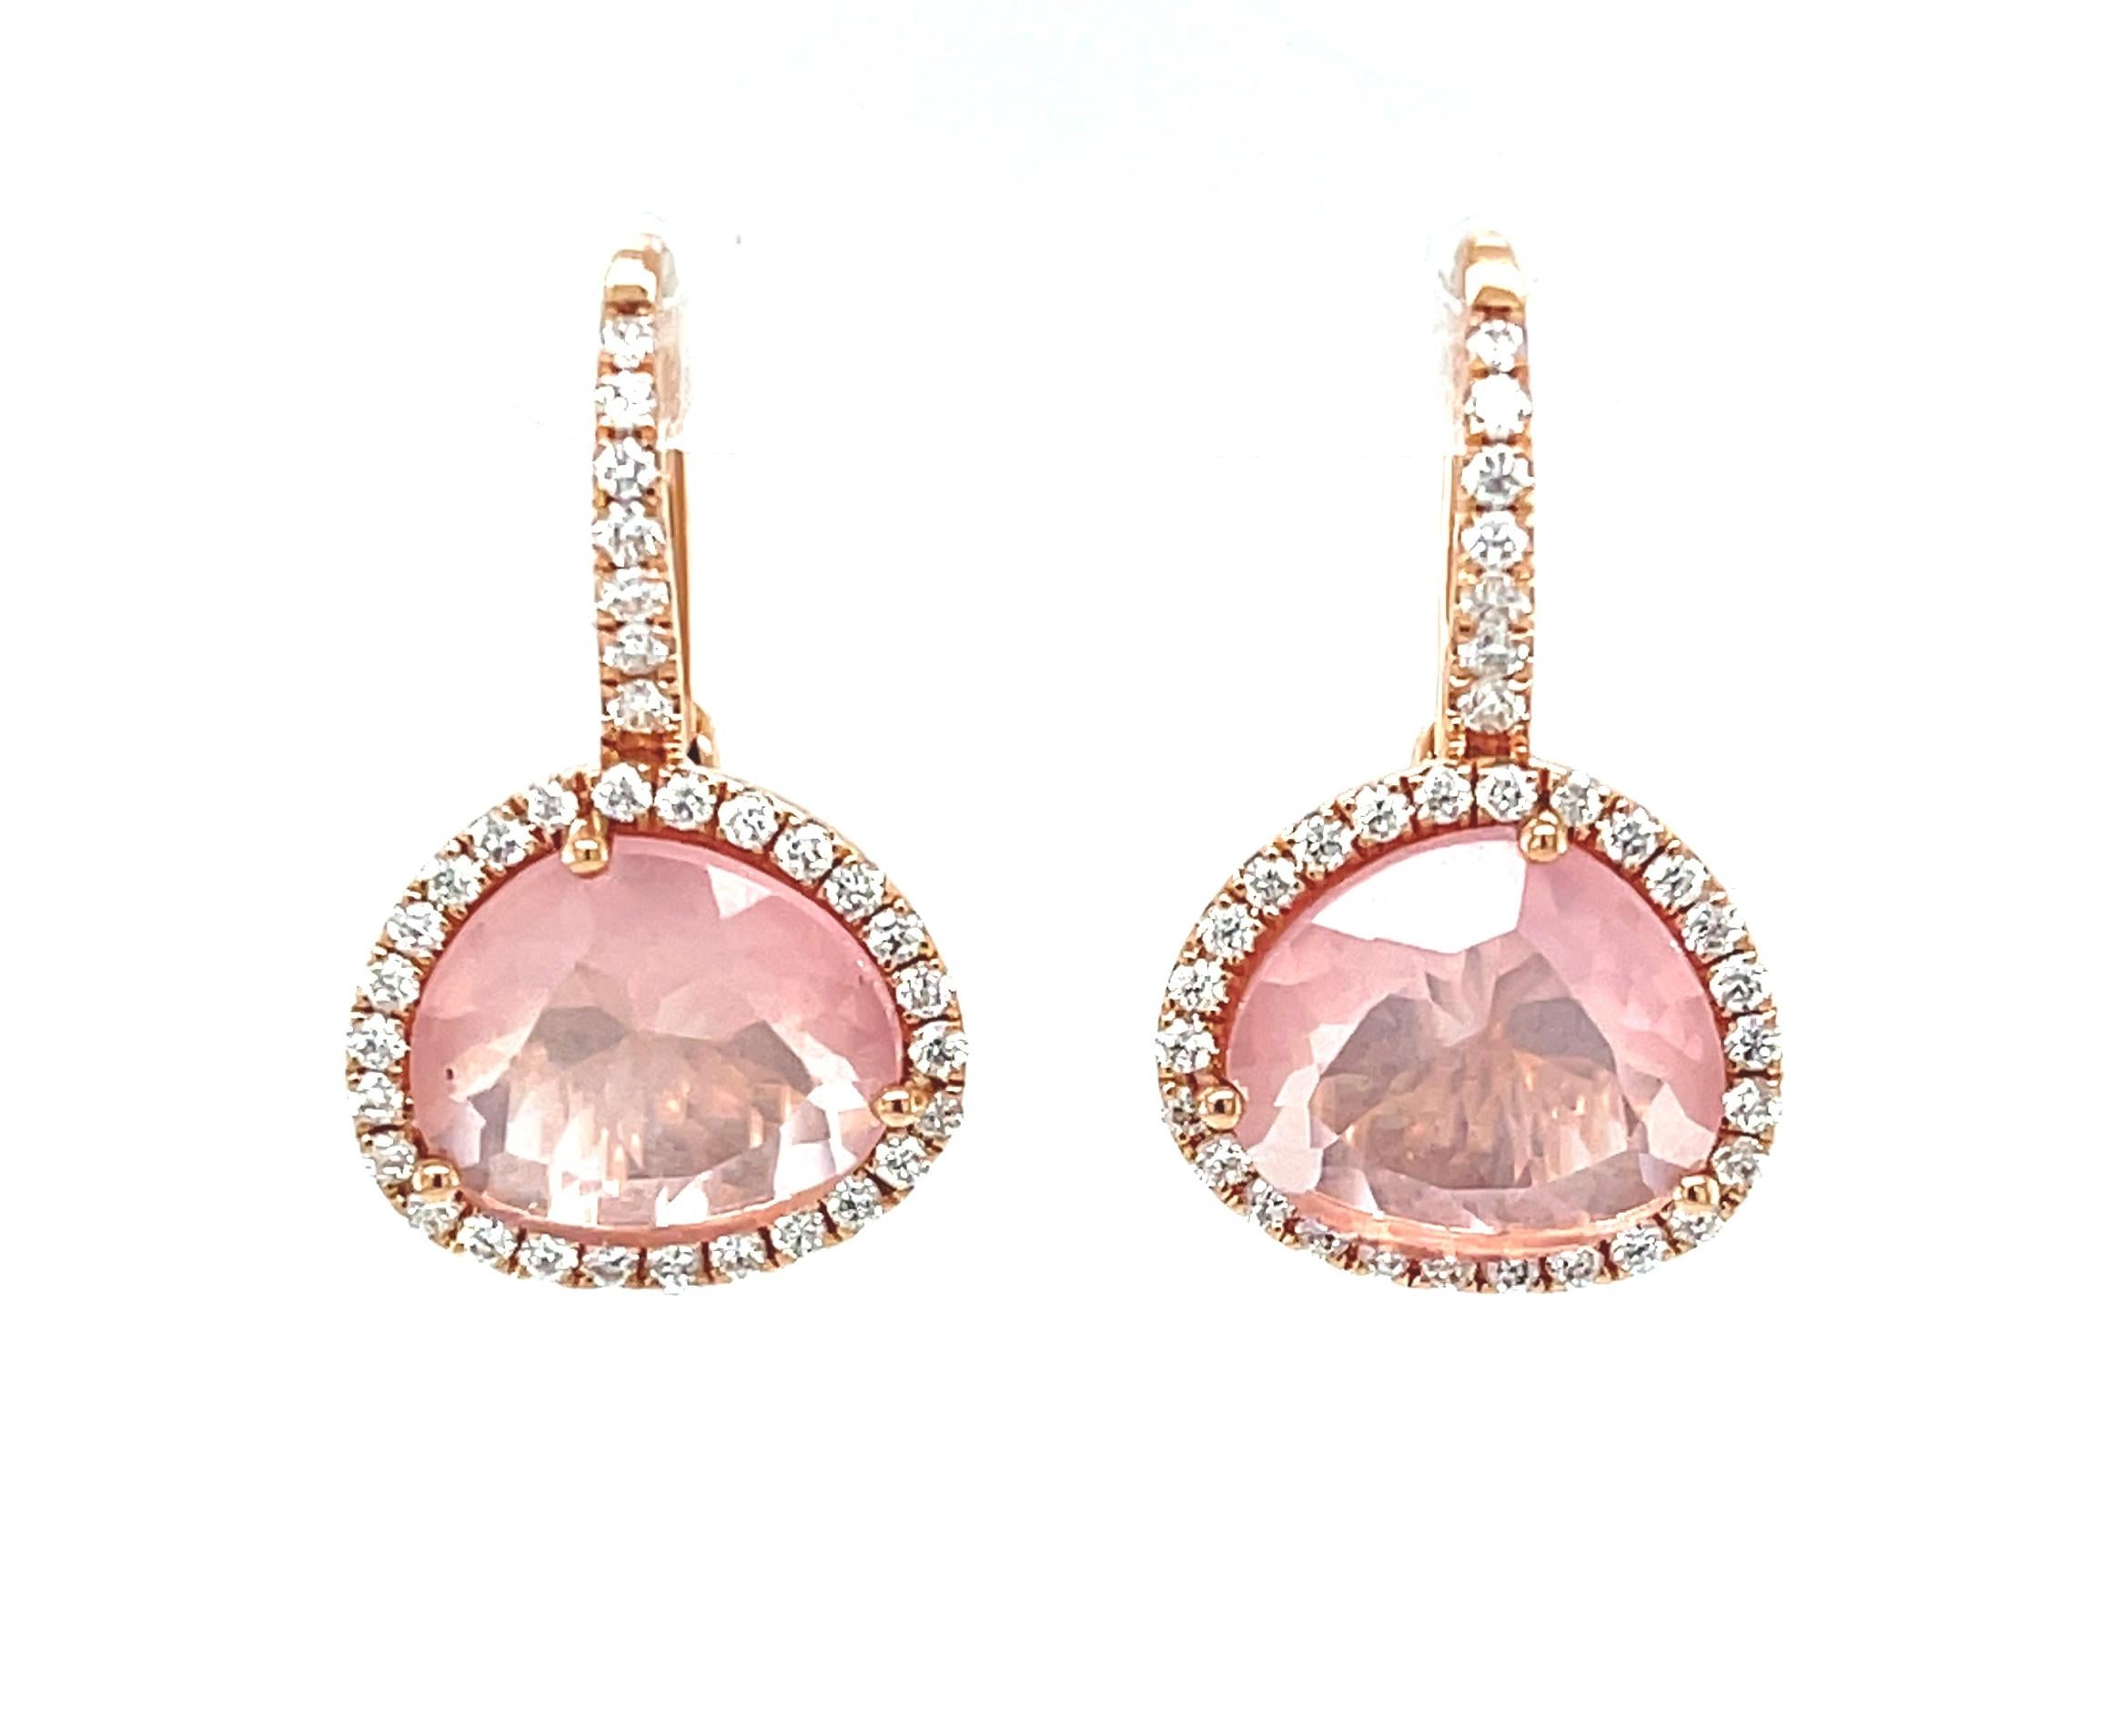 These pretty drop earrings feature faceted rose quartz crystals set in 18k rose gold with sparkling diamond set frames! The rose quartz are a unique 